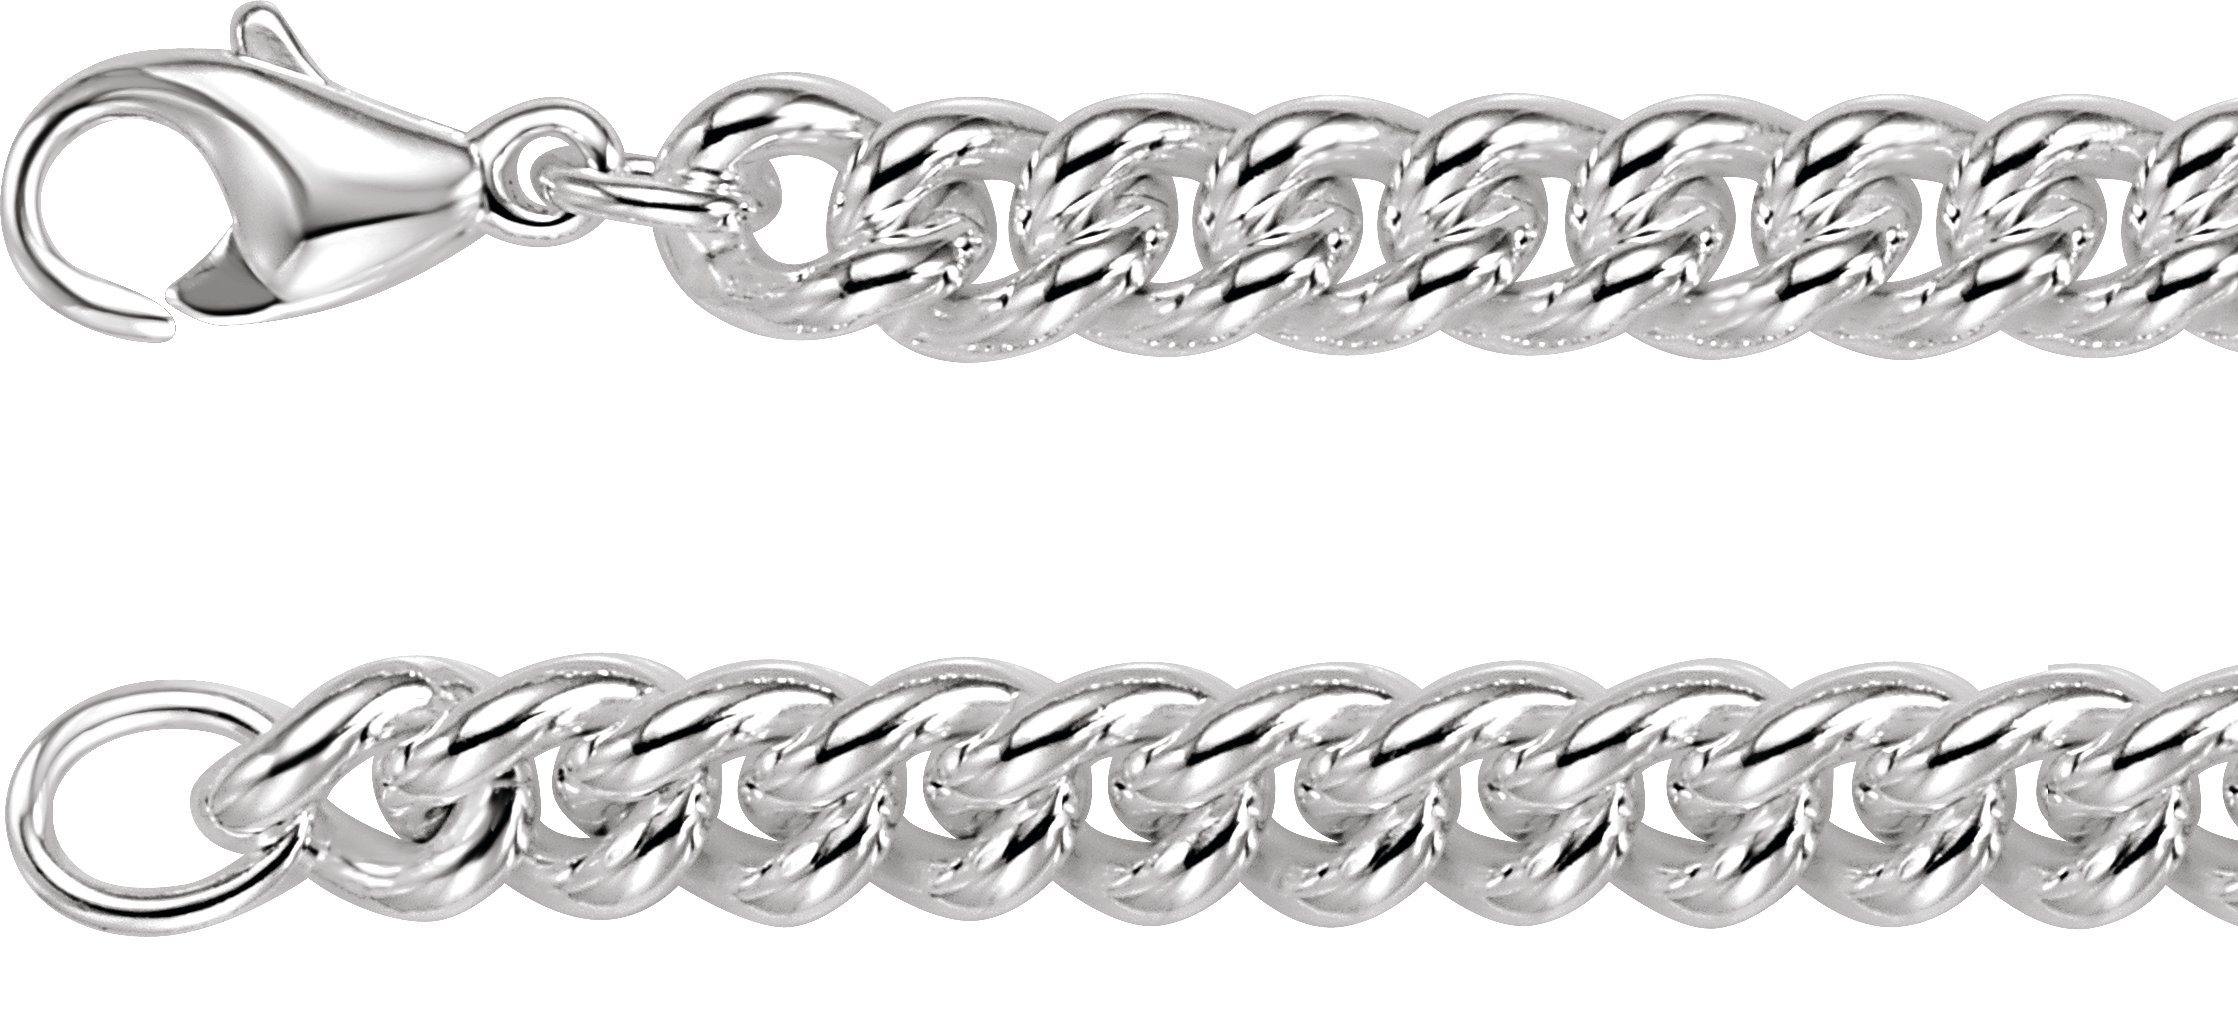 Sterling Silver 8 mm Curb 16" Chain
